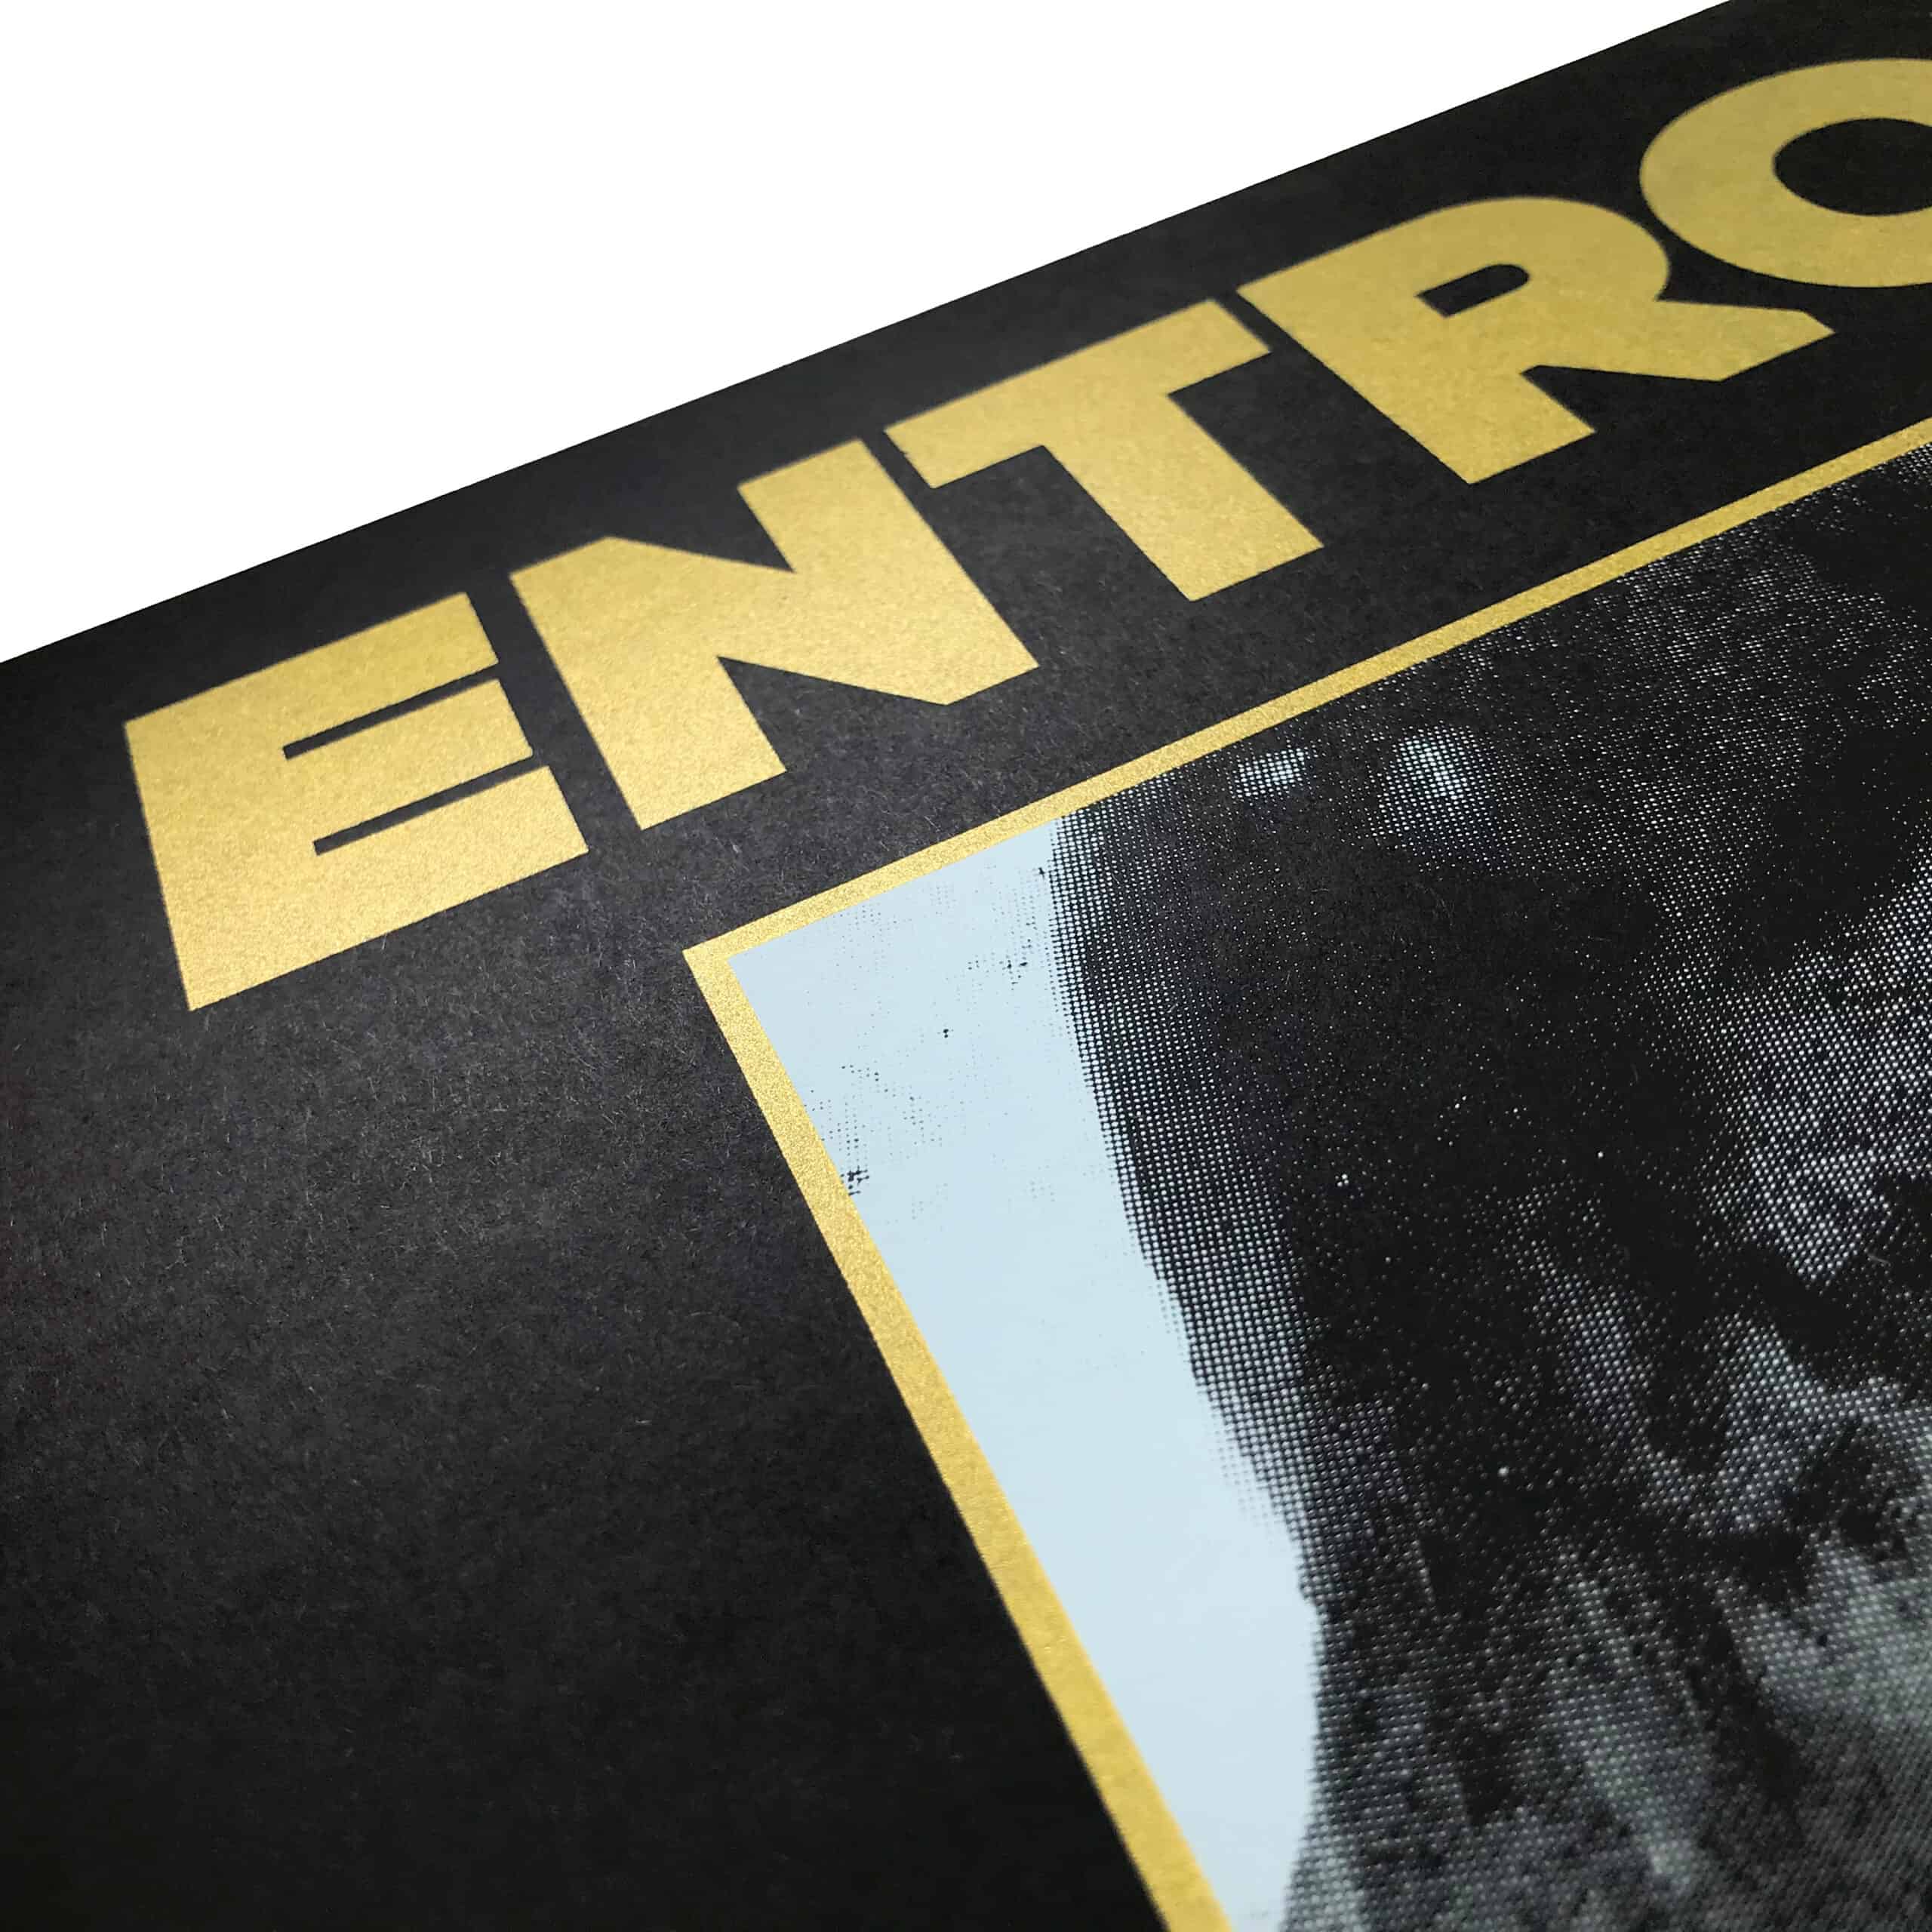 Entropy - Liminal col.LP / Silkscreen Edition (Crazysane) Entropy initially started out as a bedroom project but soon developed into a full-fledged band devoted to fusing heavier post-hardcore sounds and indie and shoegaze elements. Think Hüsker Dü meets Helmet meets Nothing meets Torche. There’s a distinct 90s vibe here, sure, but Entropy doesn’t just want to conjure up the past – their energy and drive propels them into the present and keeps their feet firmly planted in the here and now. The band features former and current members of The Now-Denial, Night Slug, Hillside and EA80.